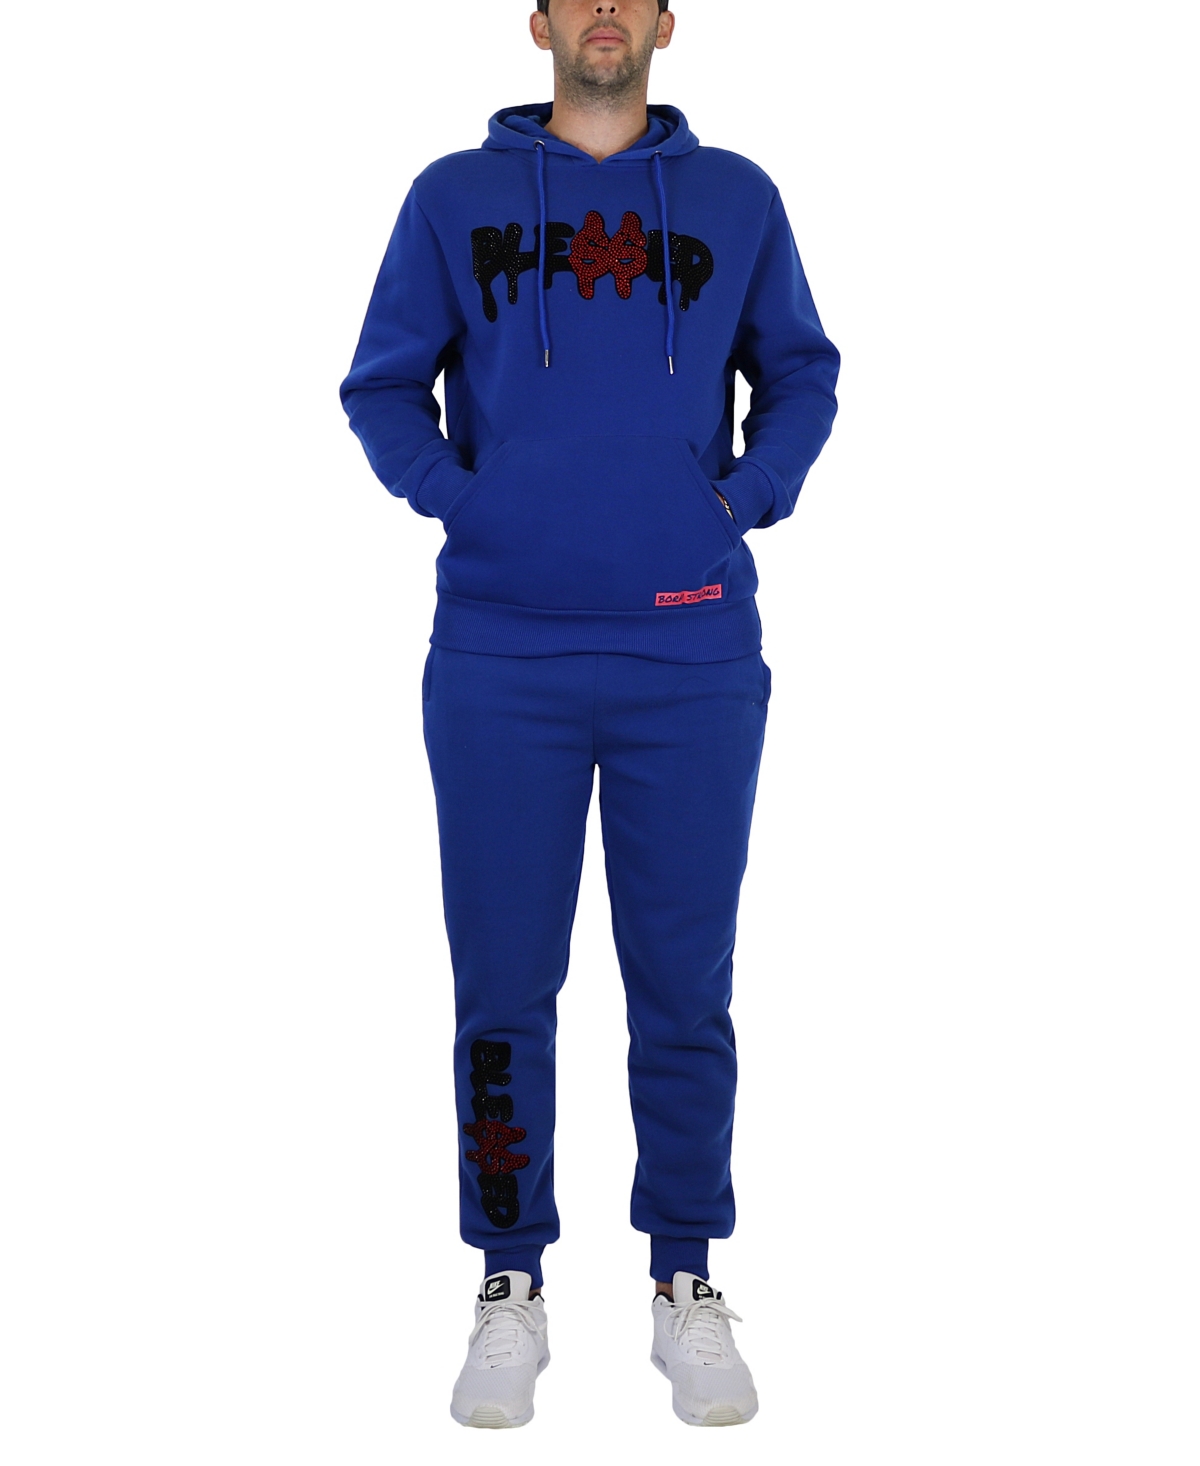 Galaxy By Harvic Men's Fleece-lined Pullover Hoodie And Jogger Sweatpants, 2 Piece Set In Royal